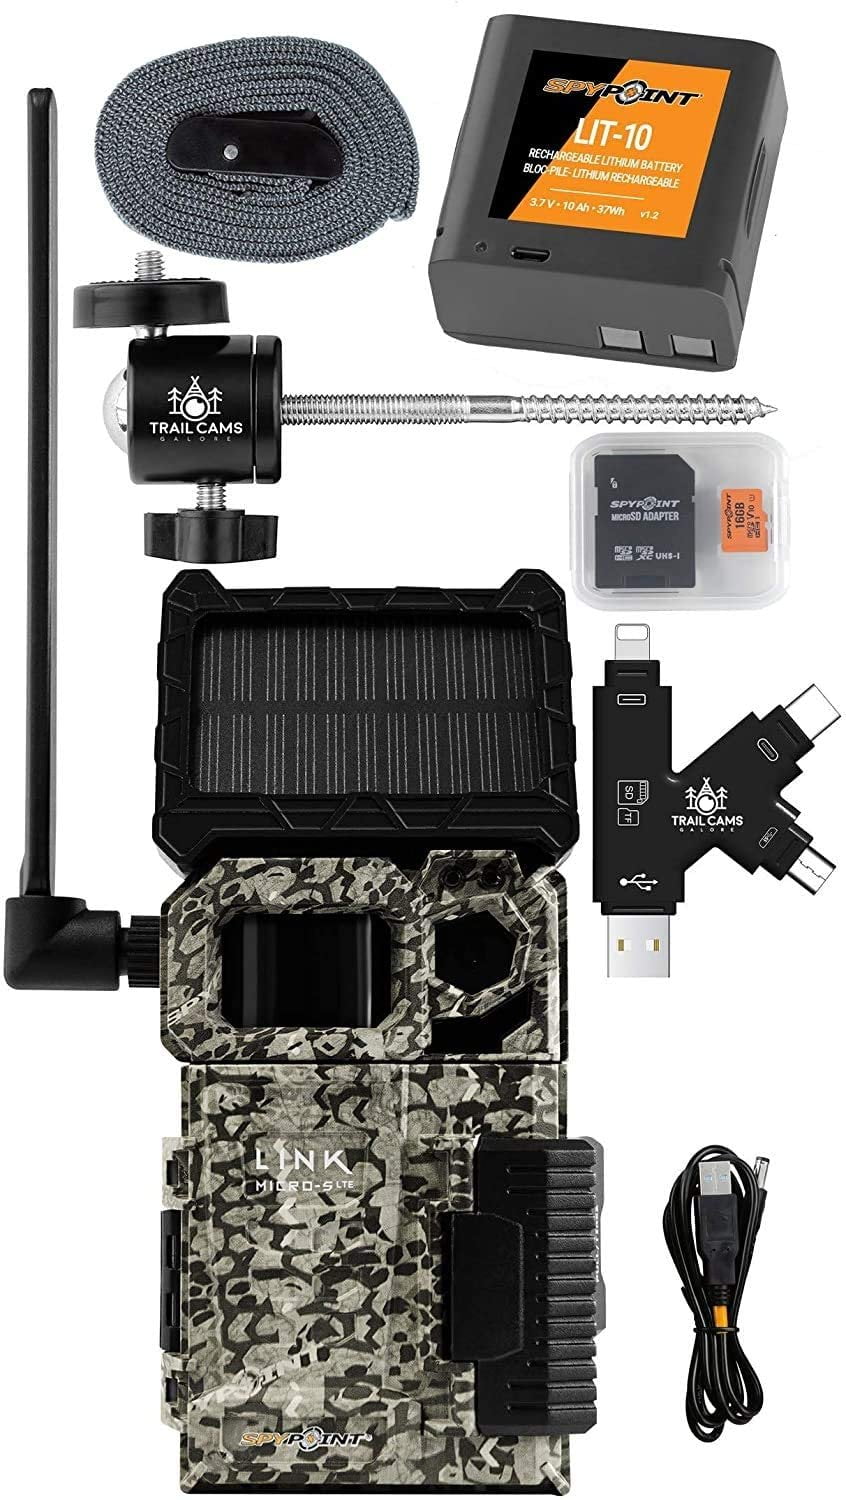 SPYPOINT LINK-W 4G Trail Camera for sale online 